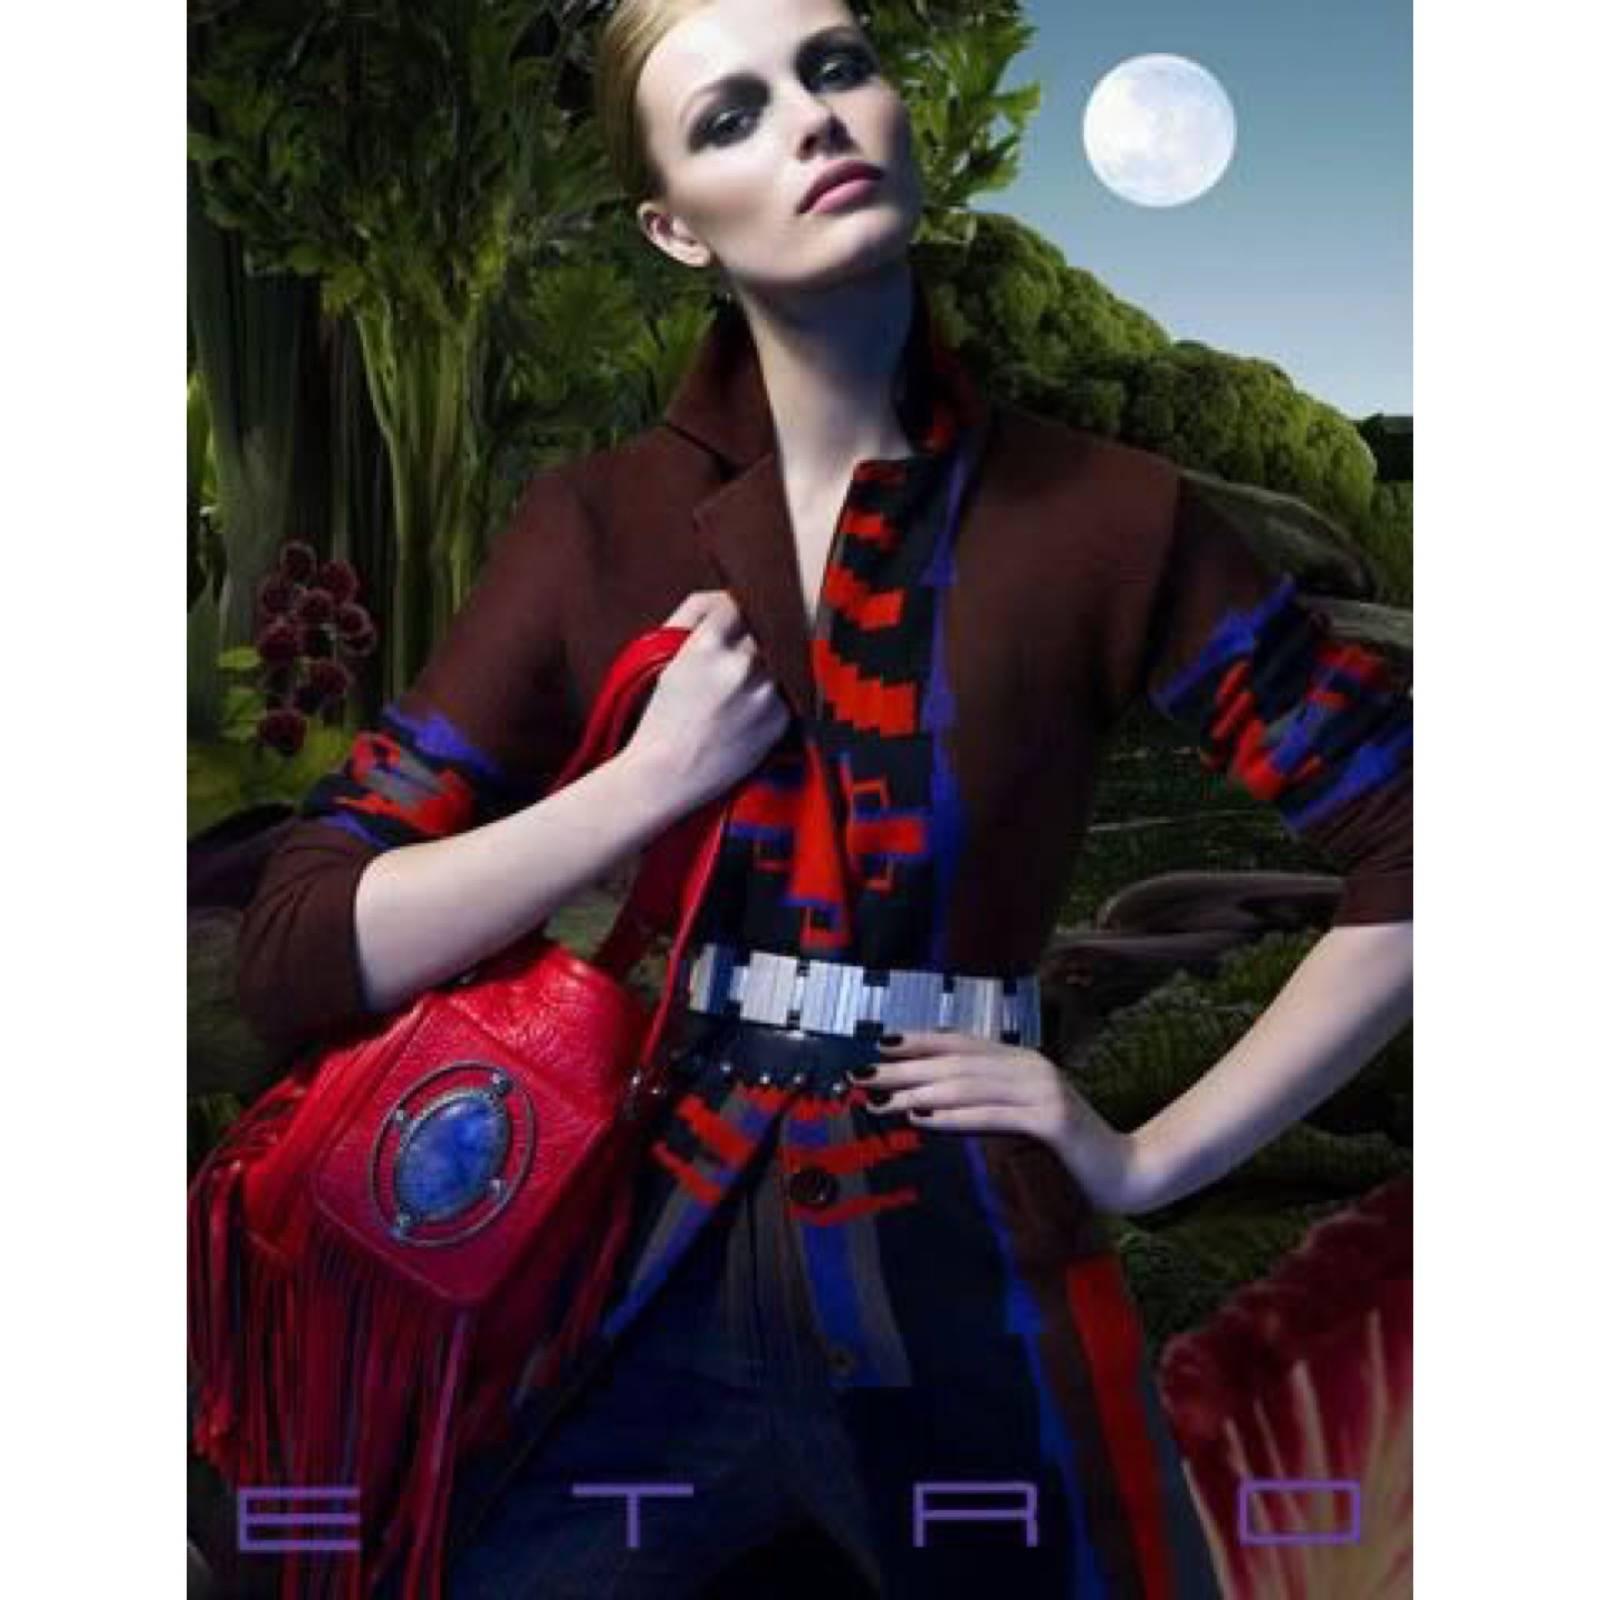 It is no surprise that this bag is from Etro. A family owned Milan-based business since 1968, Etro’s offerings are defined by their gentle slide between South Asian influence and Italian chic. This red leather handbag with loads of swishing fringe